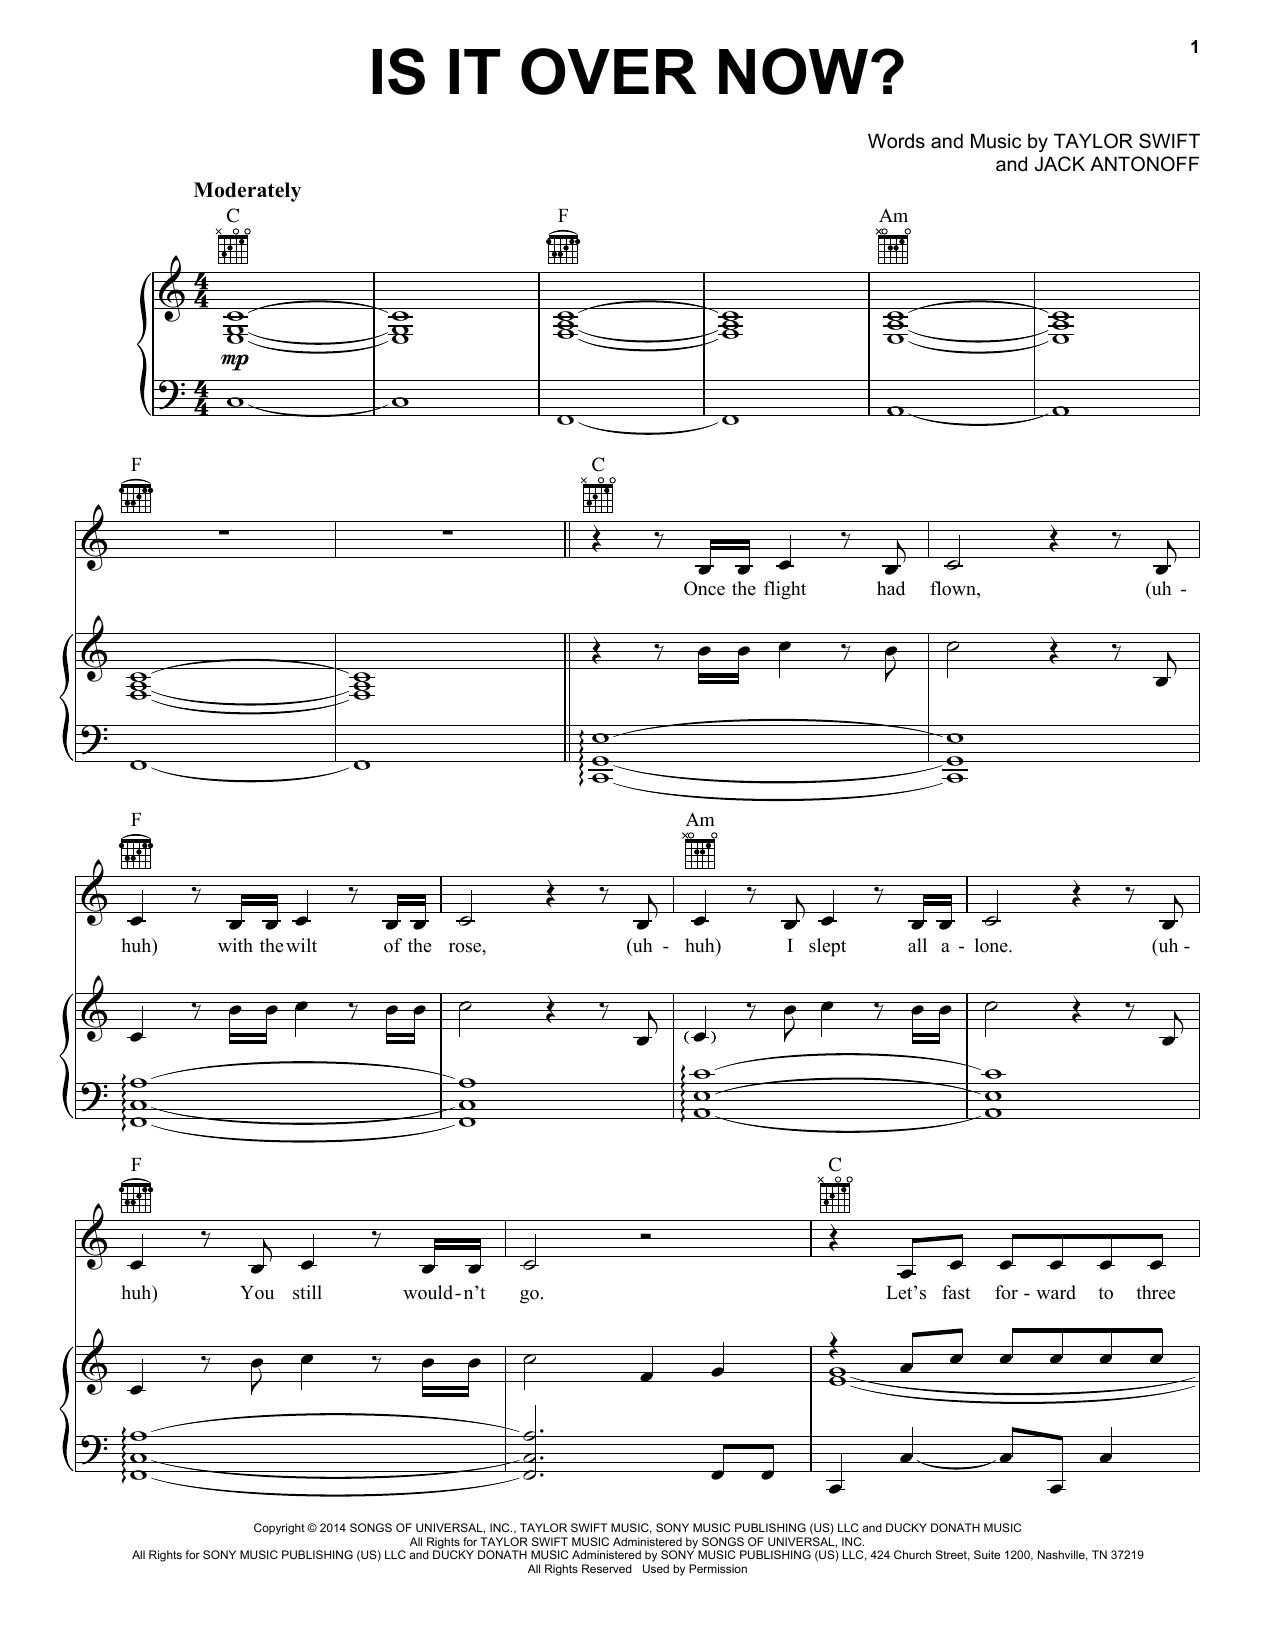 Taylor Swift Is It Over Now? (Taylor's Version) (From The Vault) sheet music notes and chords. Download Printable PDF.